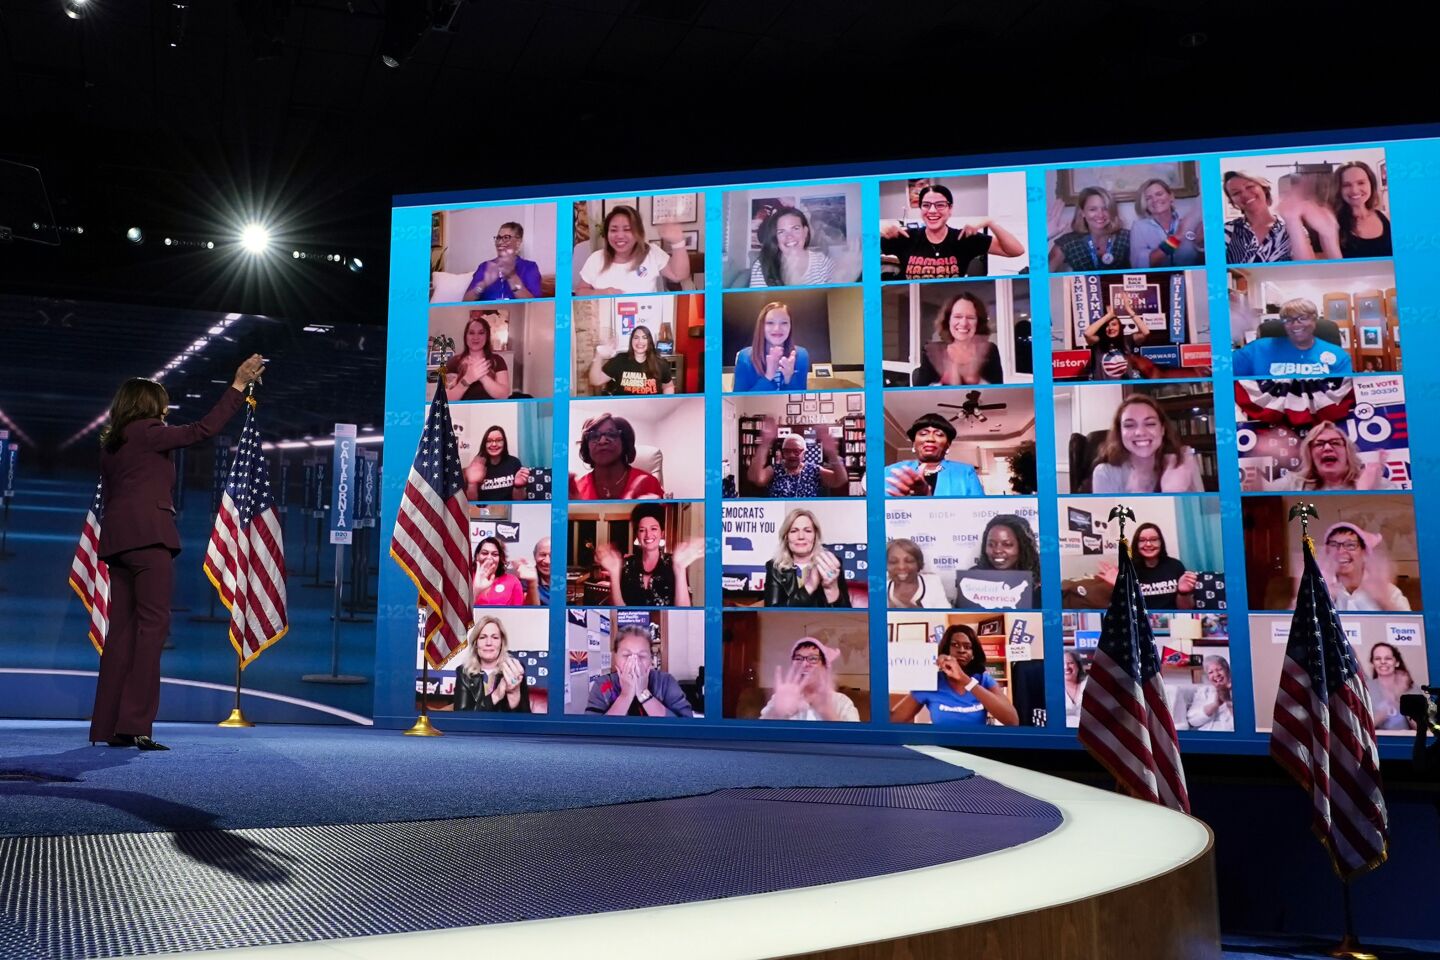 Aug. 19, 2020: Democratic vice presidential candidate Sen. Kamala Harris waves to supporters on a video monitor